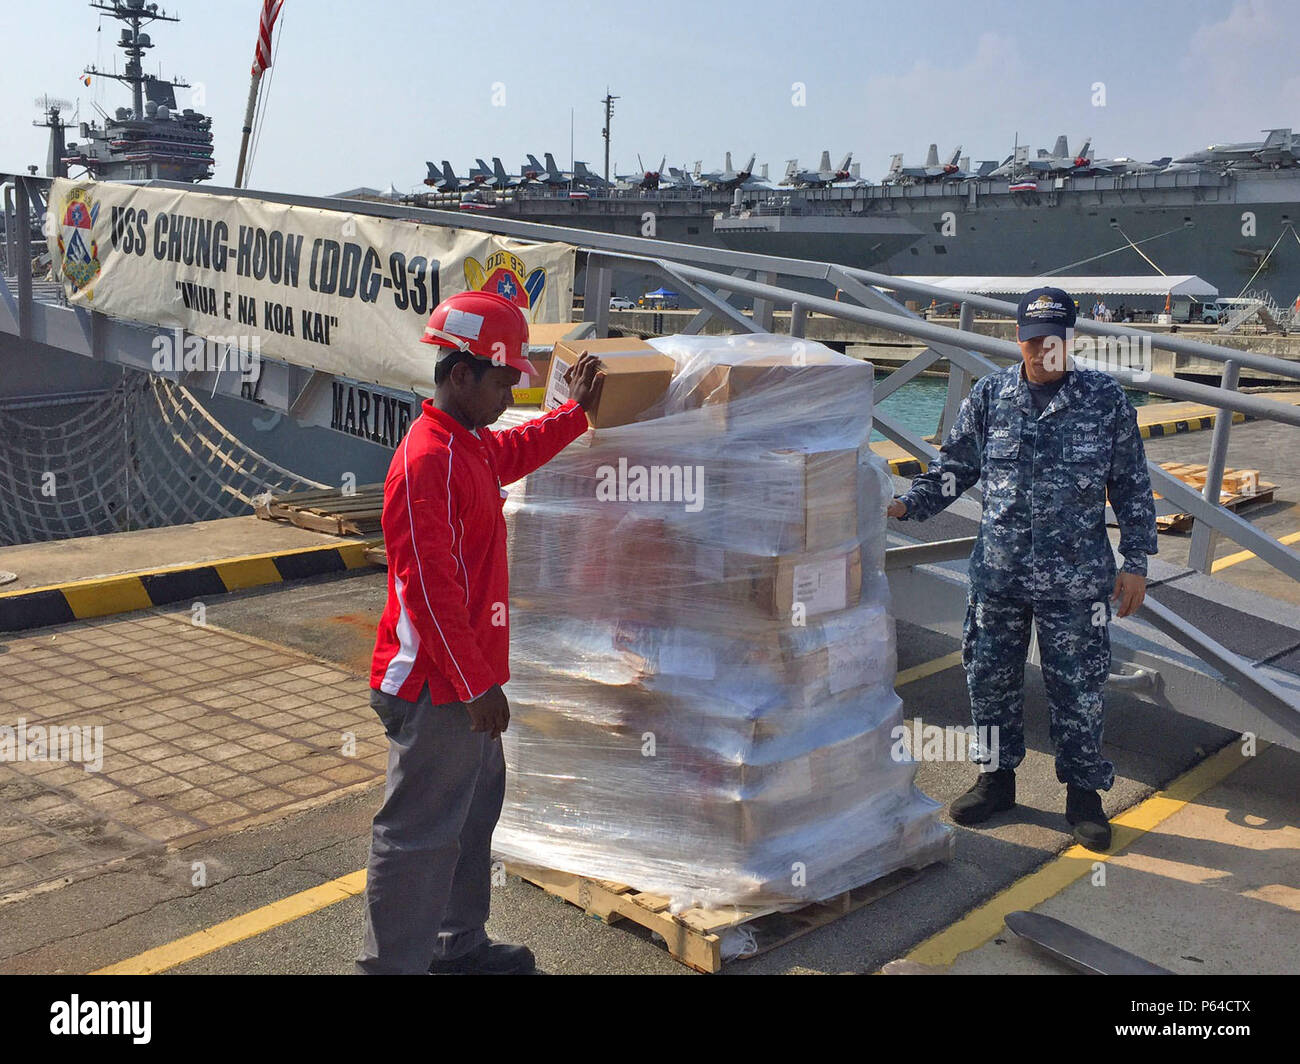 SINGAPORE (Apr. 21, 2016) – LS1 Joseph Lejos (right), Naval Supply Systems Command Fleet Logistics Center Yokosuka, Site Singapore (FLC), supervises the delivery of supply items to ships belonging to the USS John C. Stennis (CVN 74) Carrier Strike Group Apr. 21, 2016. Navy Region Center Singapore (NRCS) welcomed Sailors from the strike group during a port visit in Sembawang, Singapore, April 19-23, 2016. The FLC logistics team coordinates with supply officers onboard ships prior to their arrival in order to provide quality logistics services such as provisions, fuel, postal services, and pier- Stock Photo